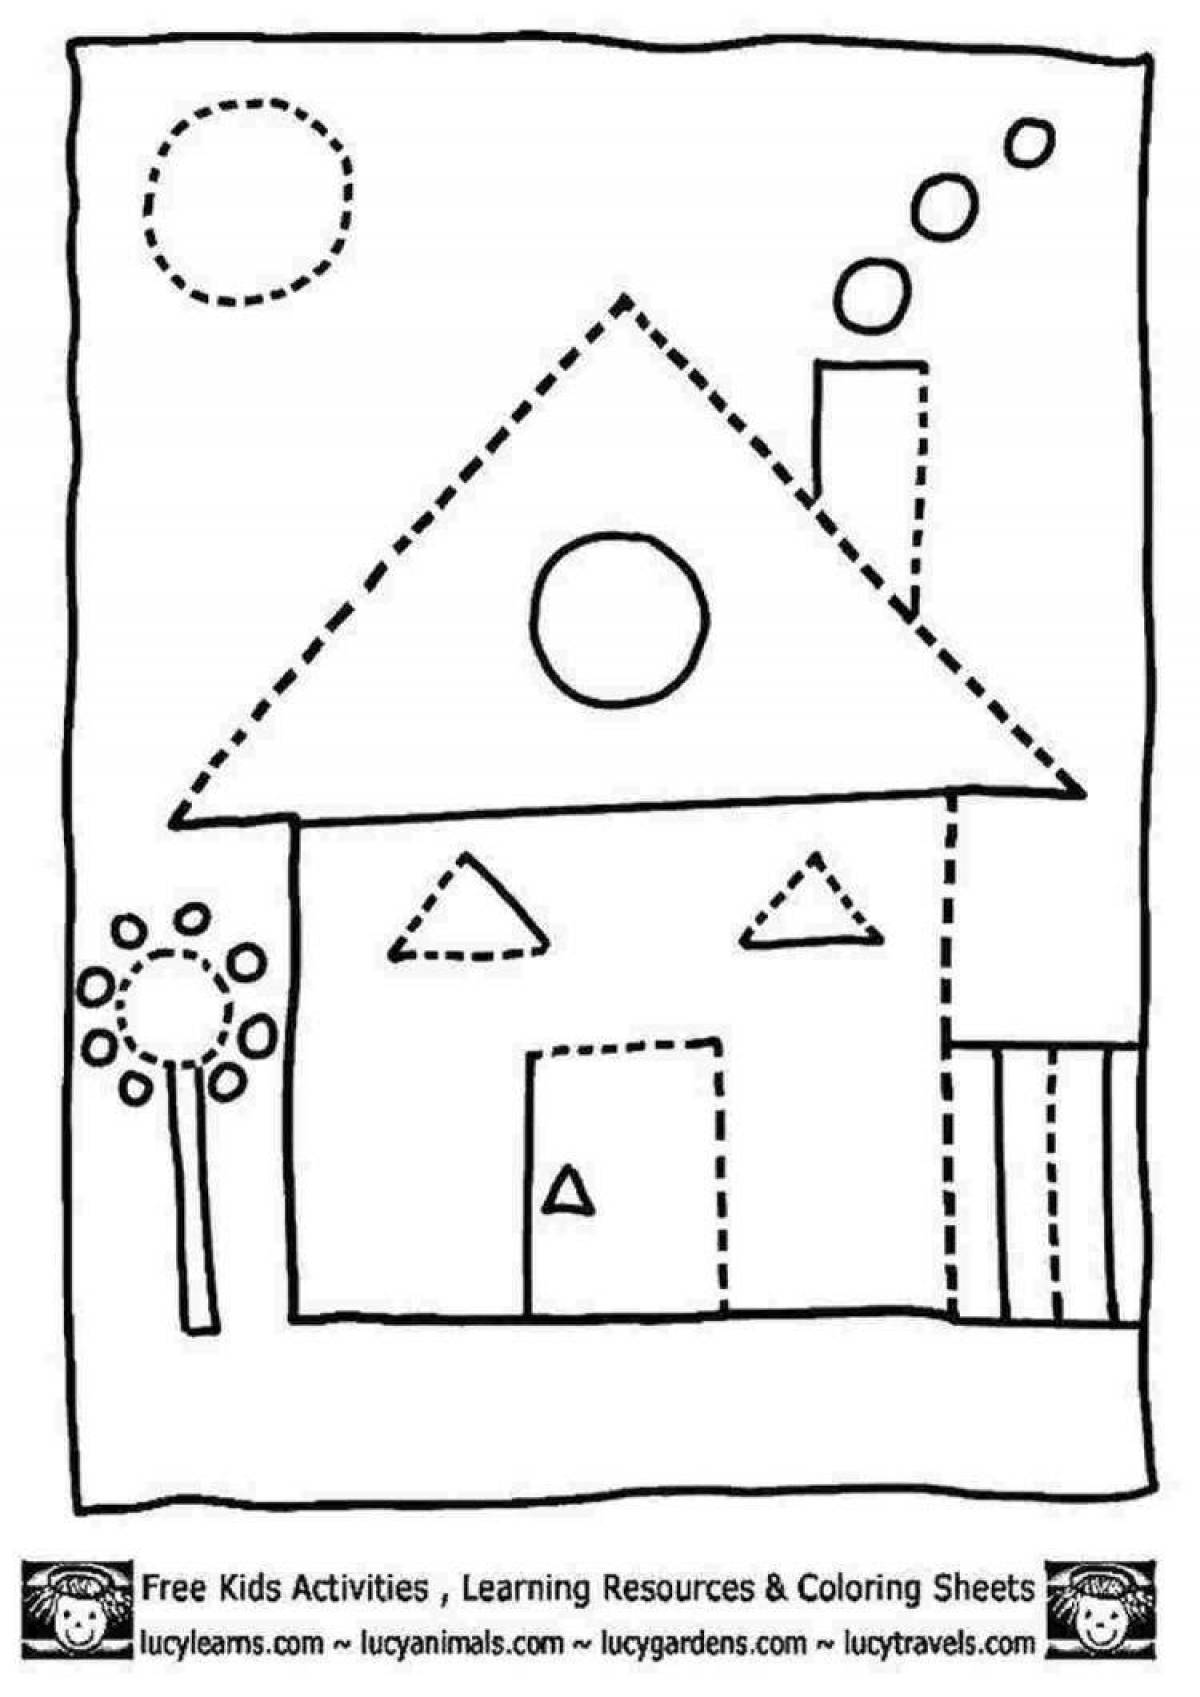 Exquisite geometric house coloring book